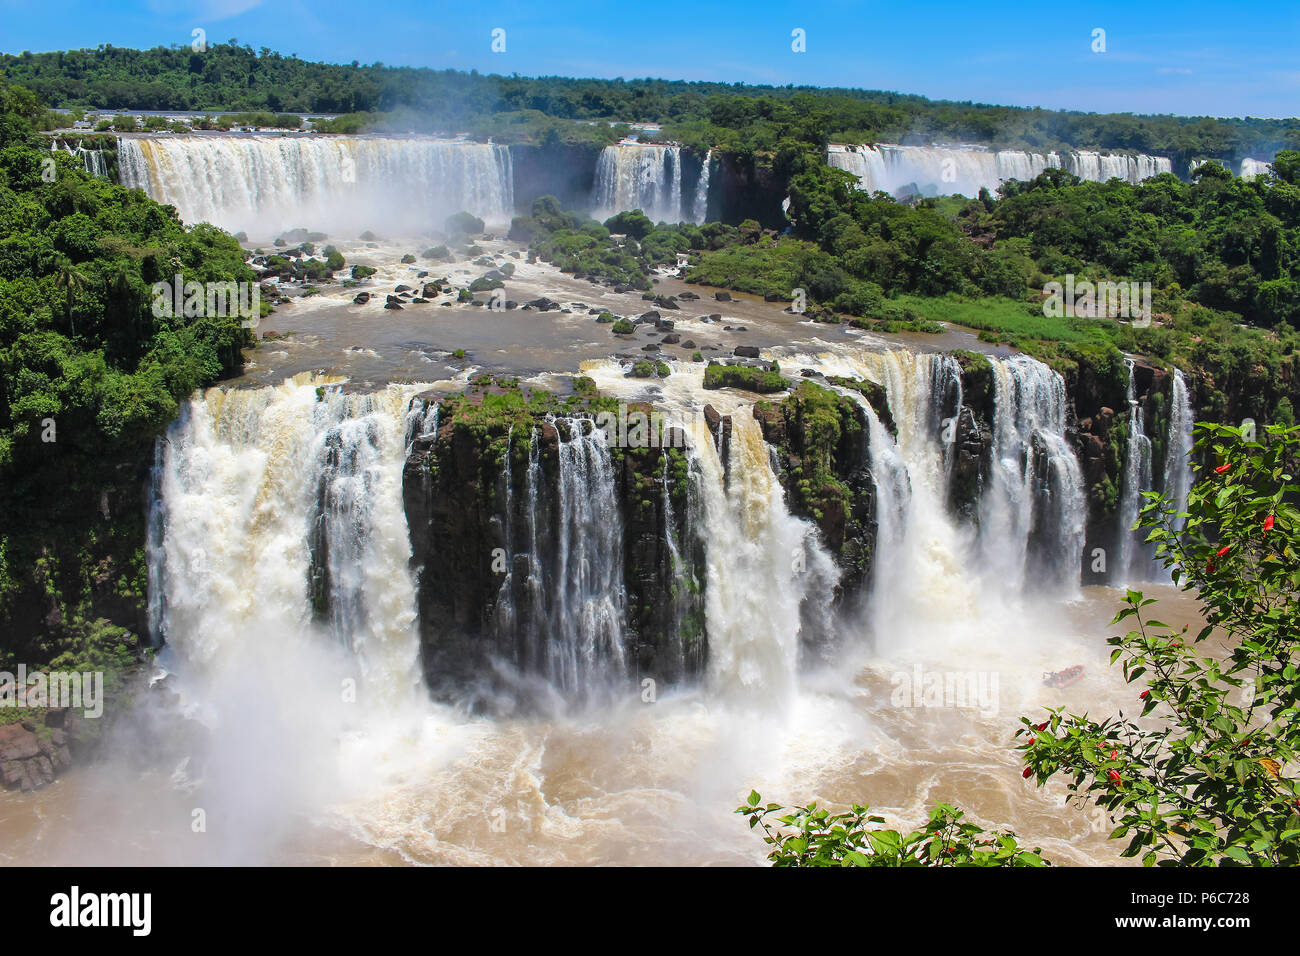 Iguazu Falls or Iguaçu Falls are waterfalls of the Iguazu River on the border of the Argentine province of Misiones and the Brazilian state of Parana, Stock Photo